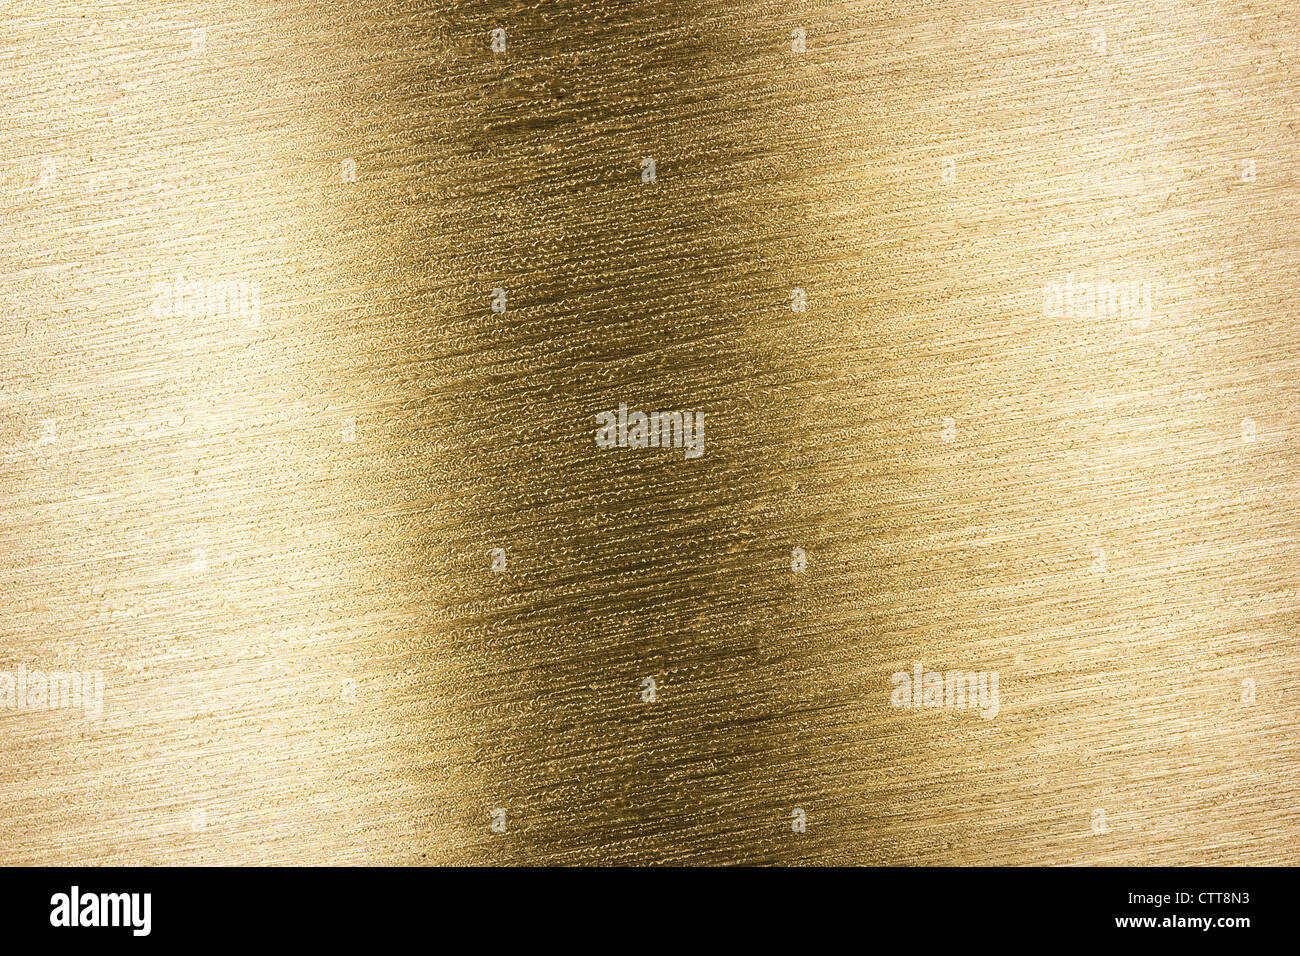 line gold metallic textured, with rough pattern Stock Photo